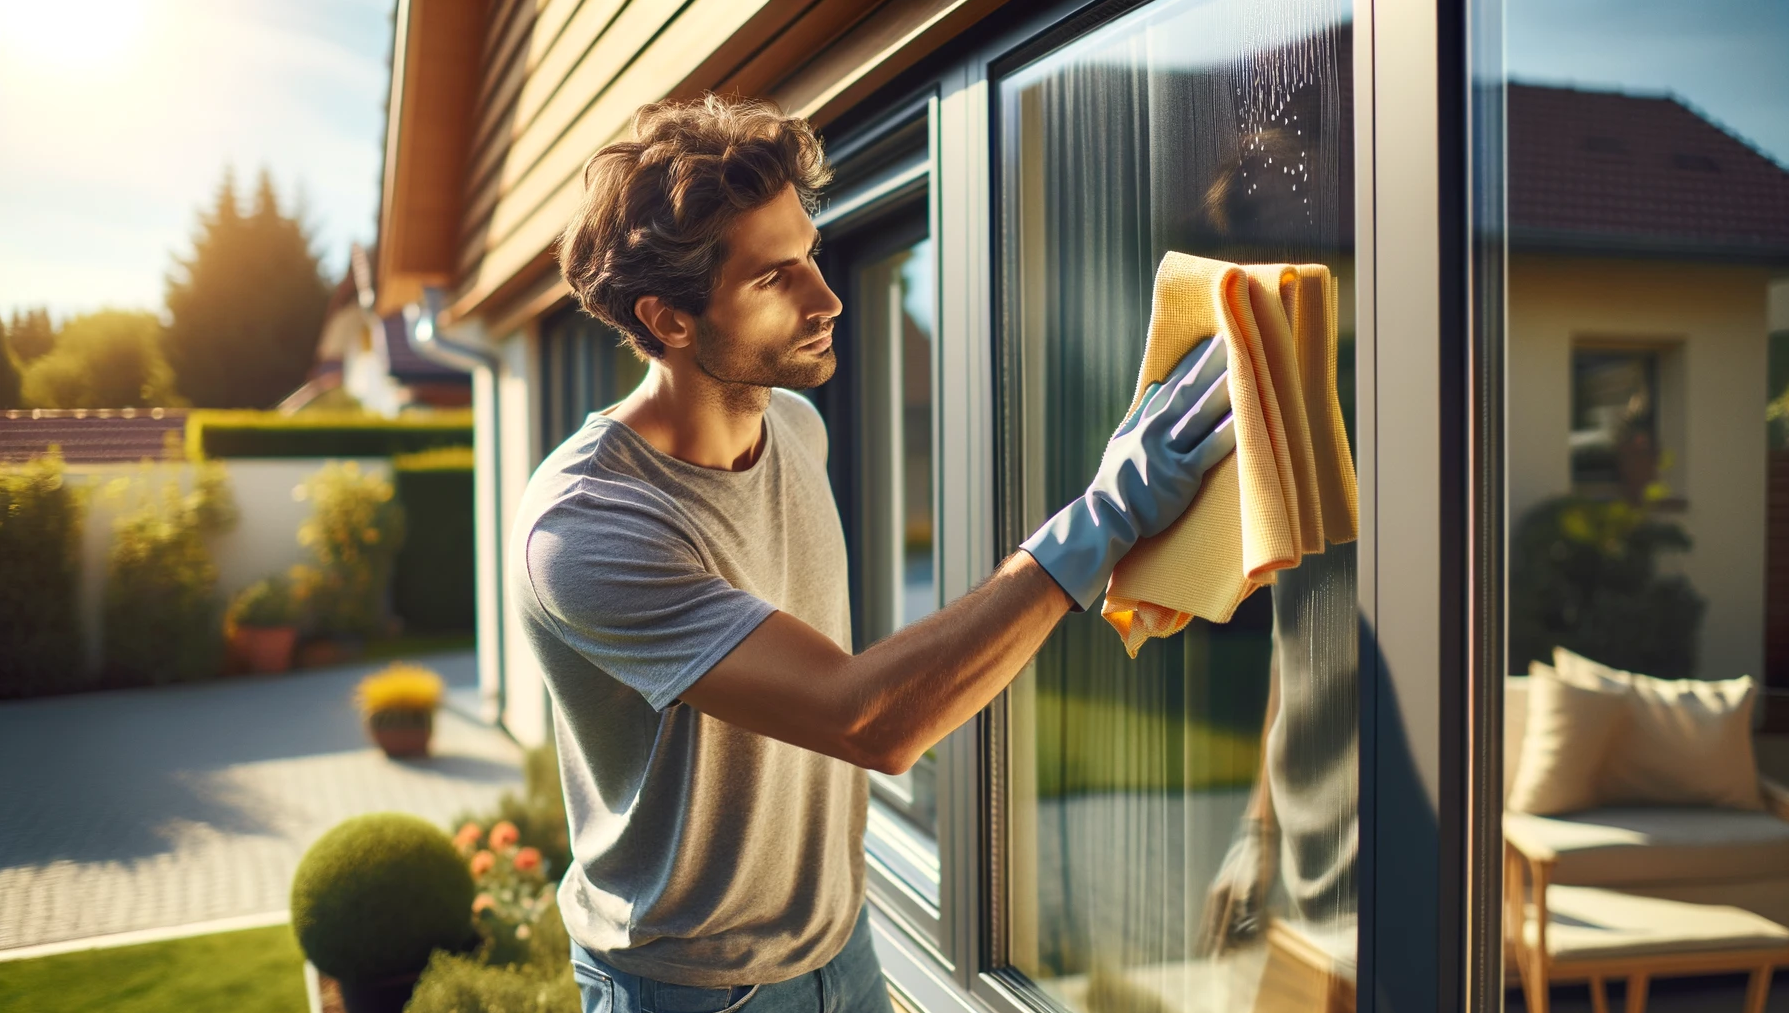 Easy Window Cleaning: Making Your Home’s Windows Shine